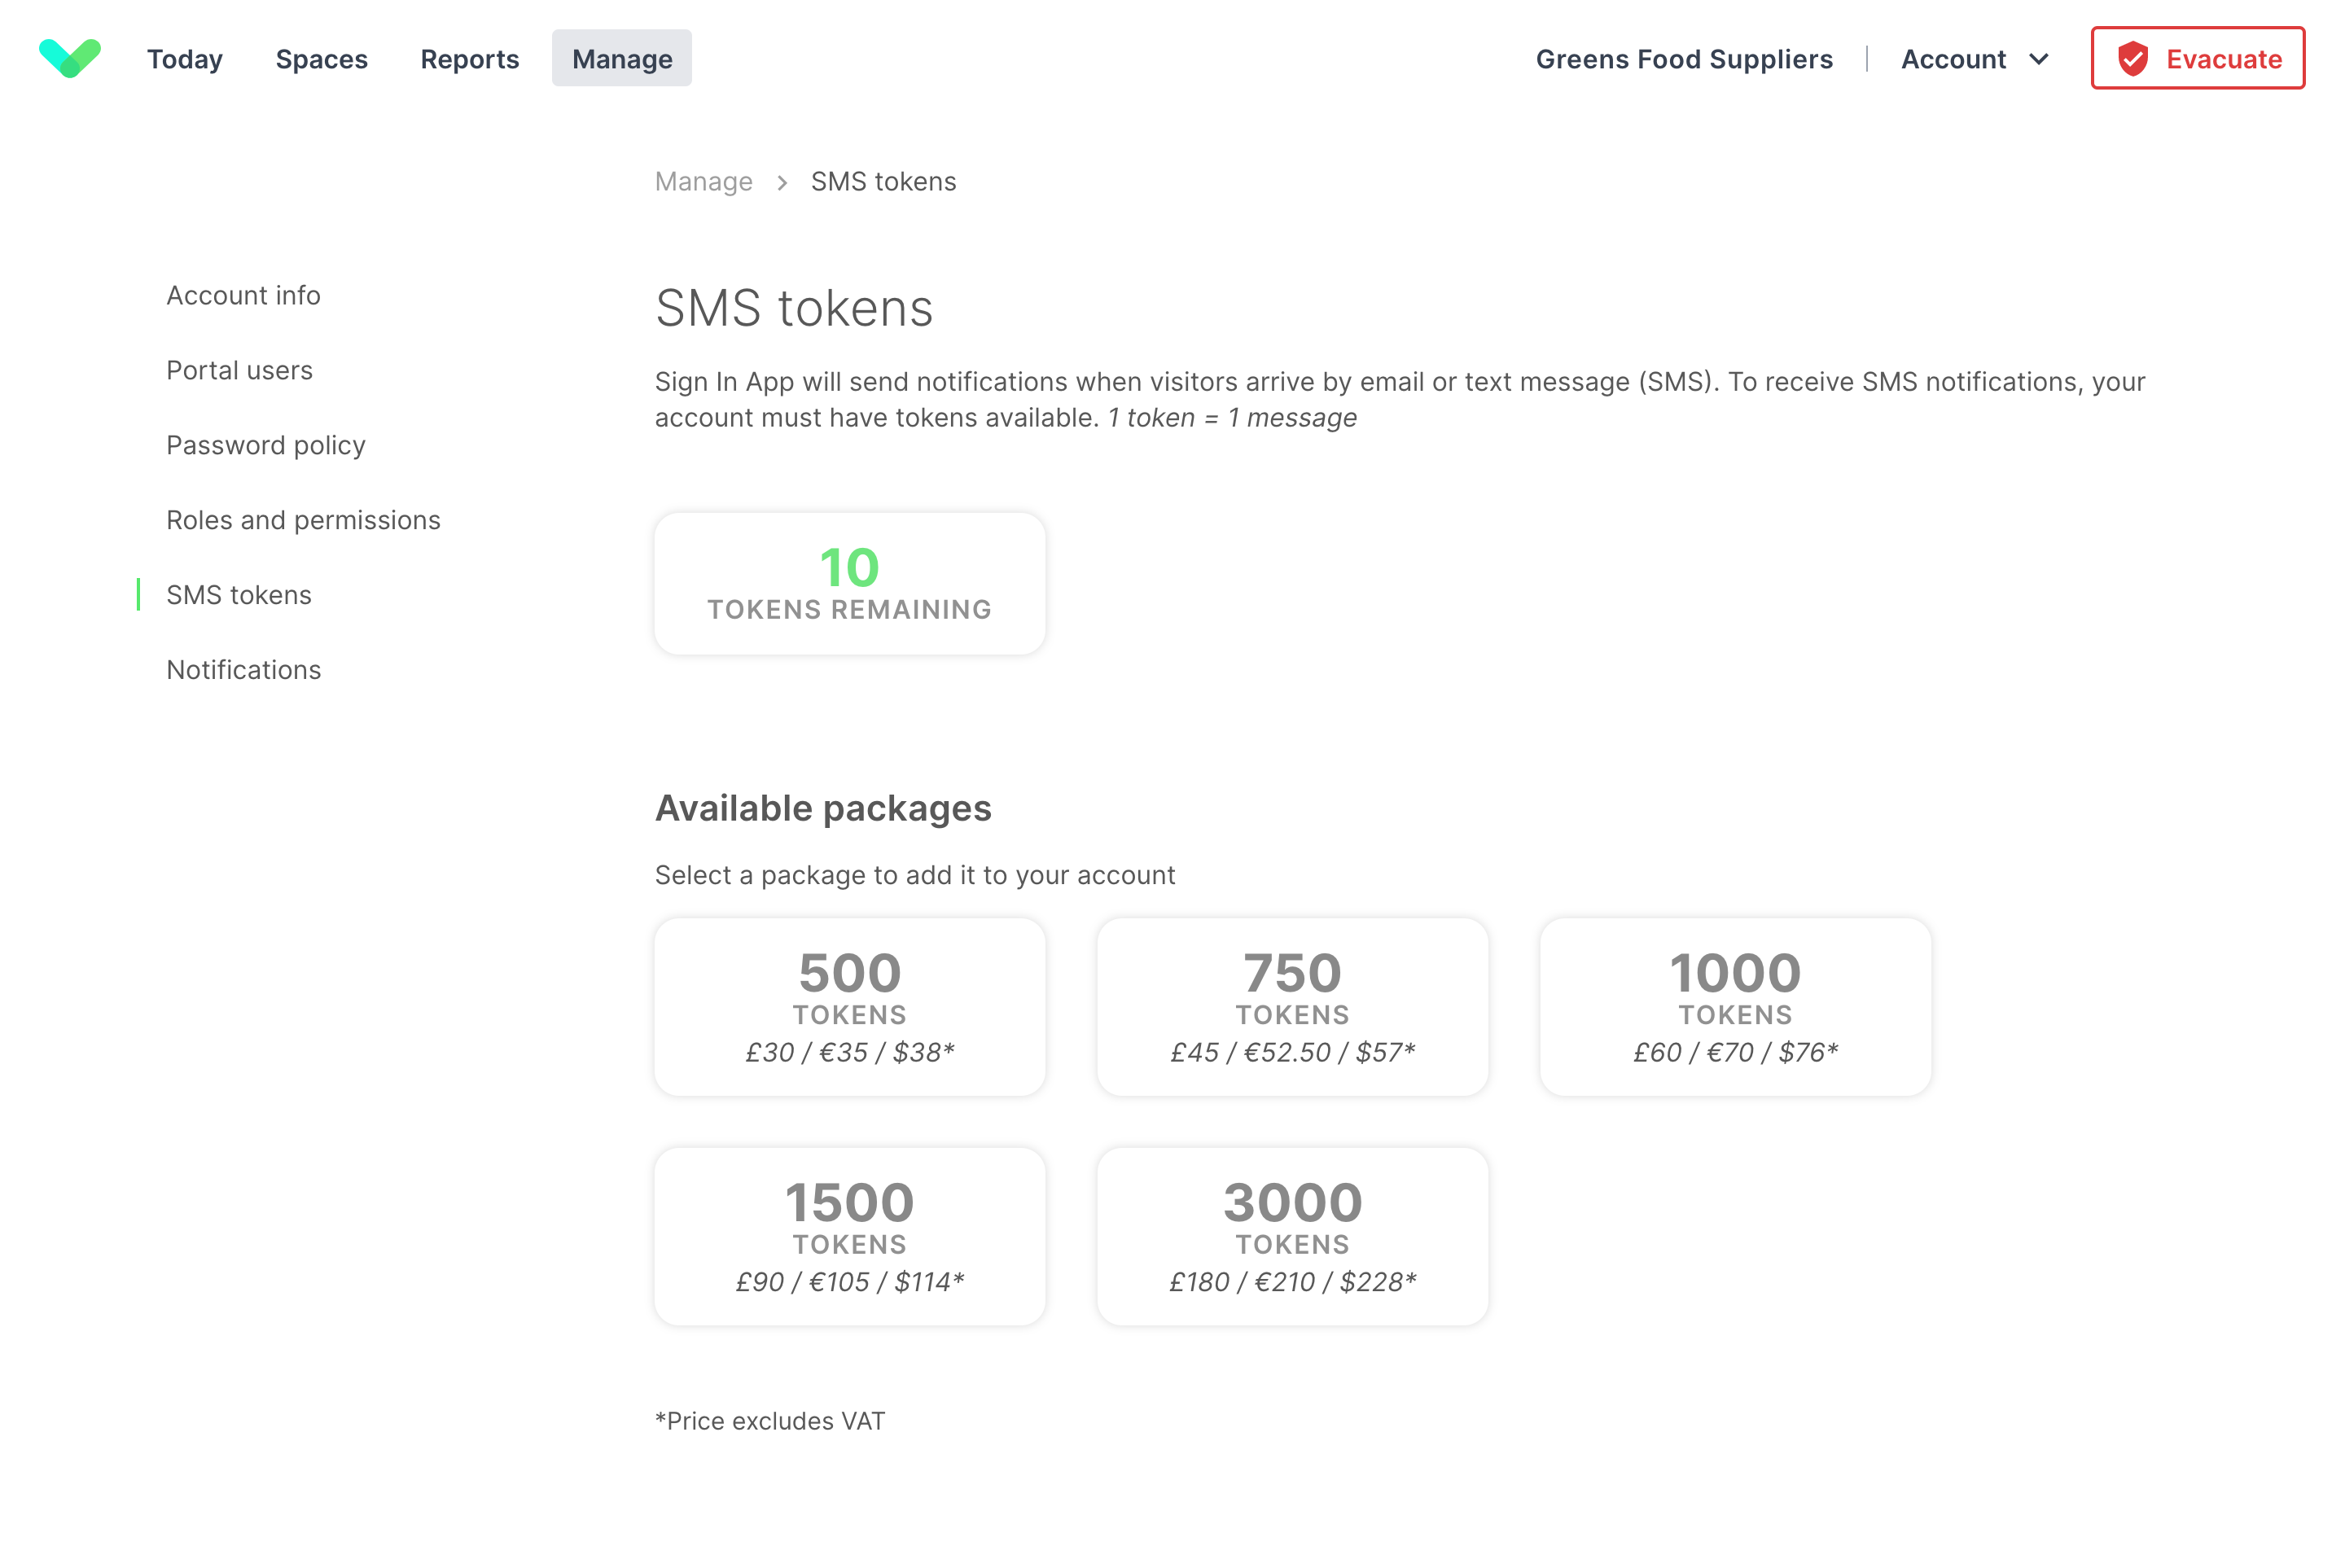 The SMS Tokens manage screen on the Sign In App portal